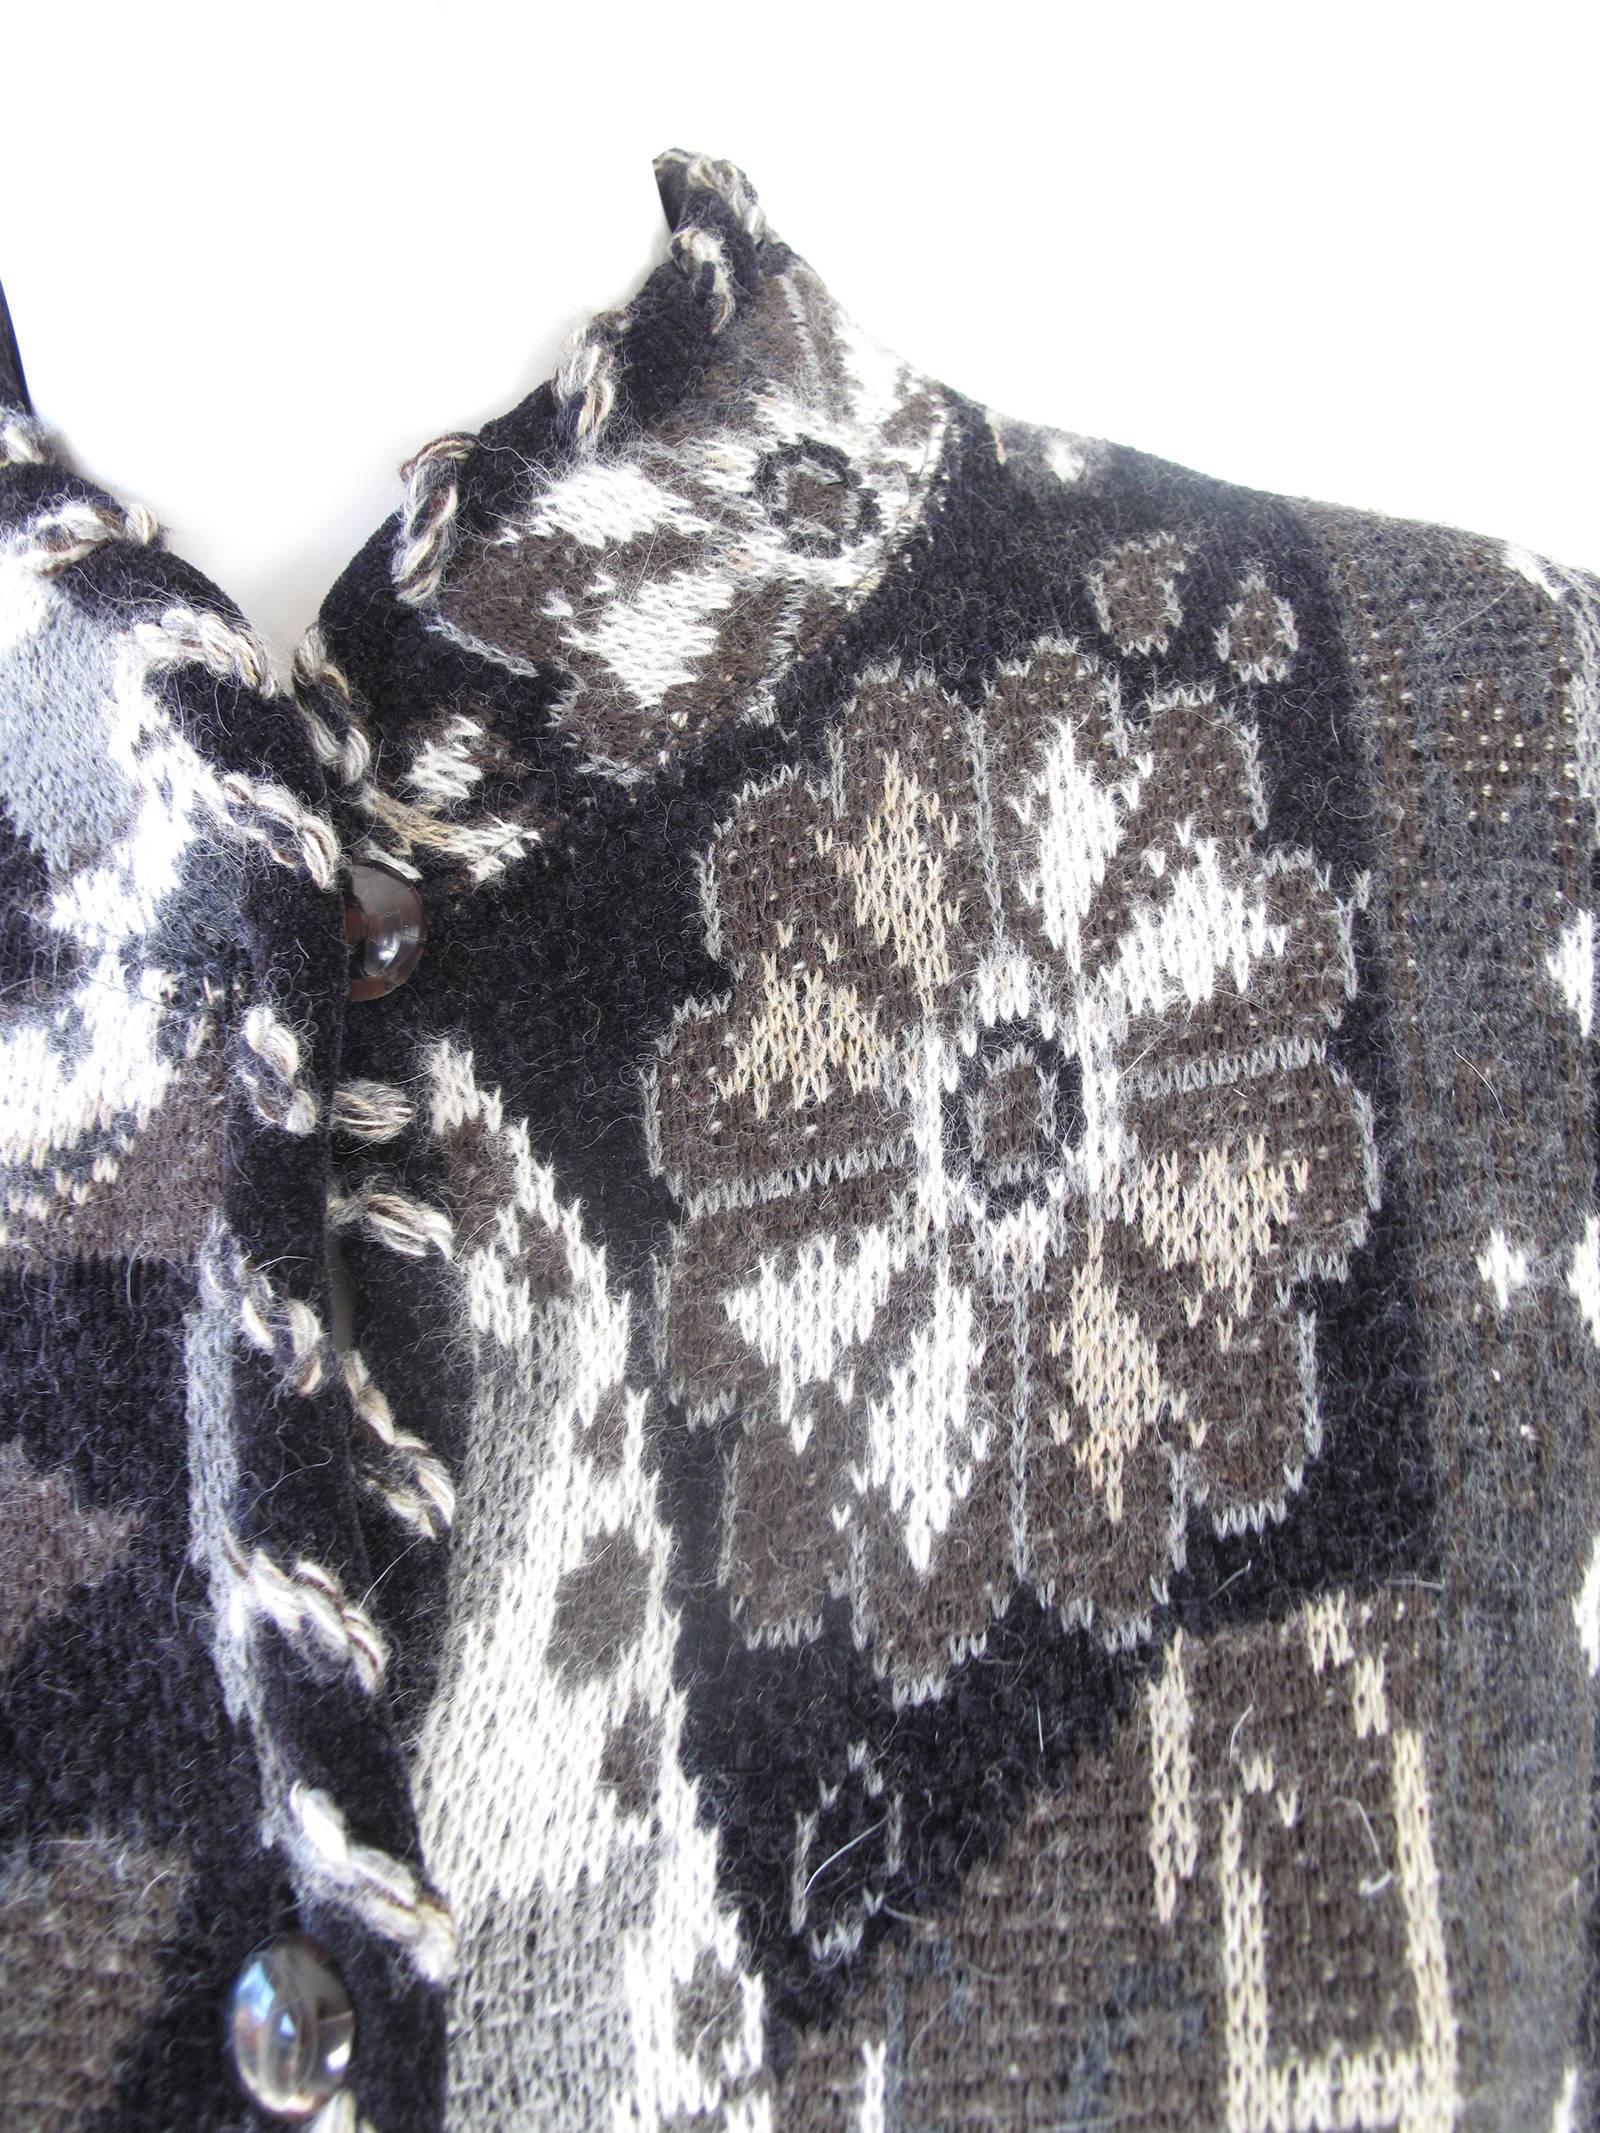 Ungaro wool cardigan. Condition: Excellent. Size M - L 

We accept returns for refund, please see our terms. We offer free ground shipping within the US. 
